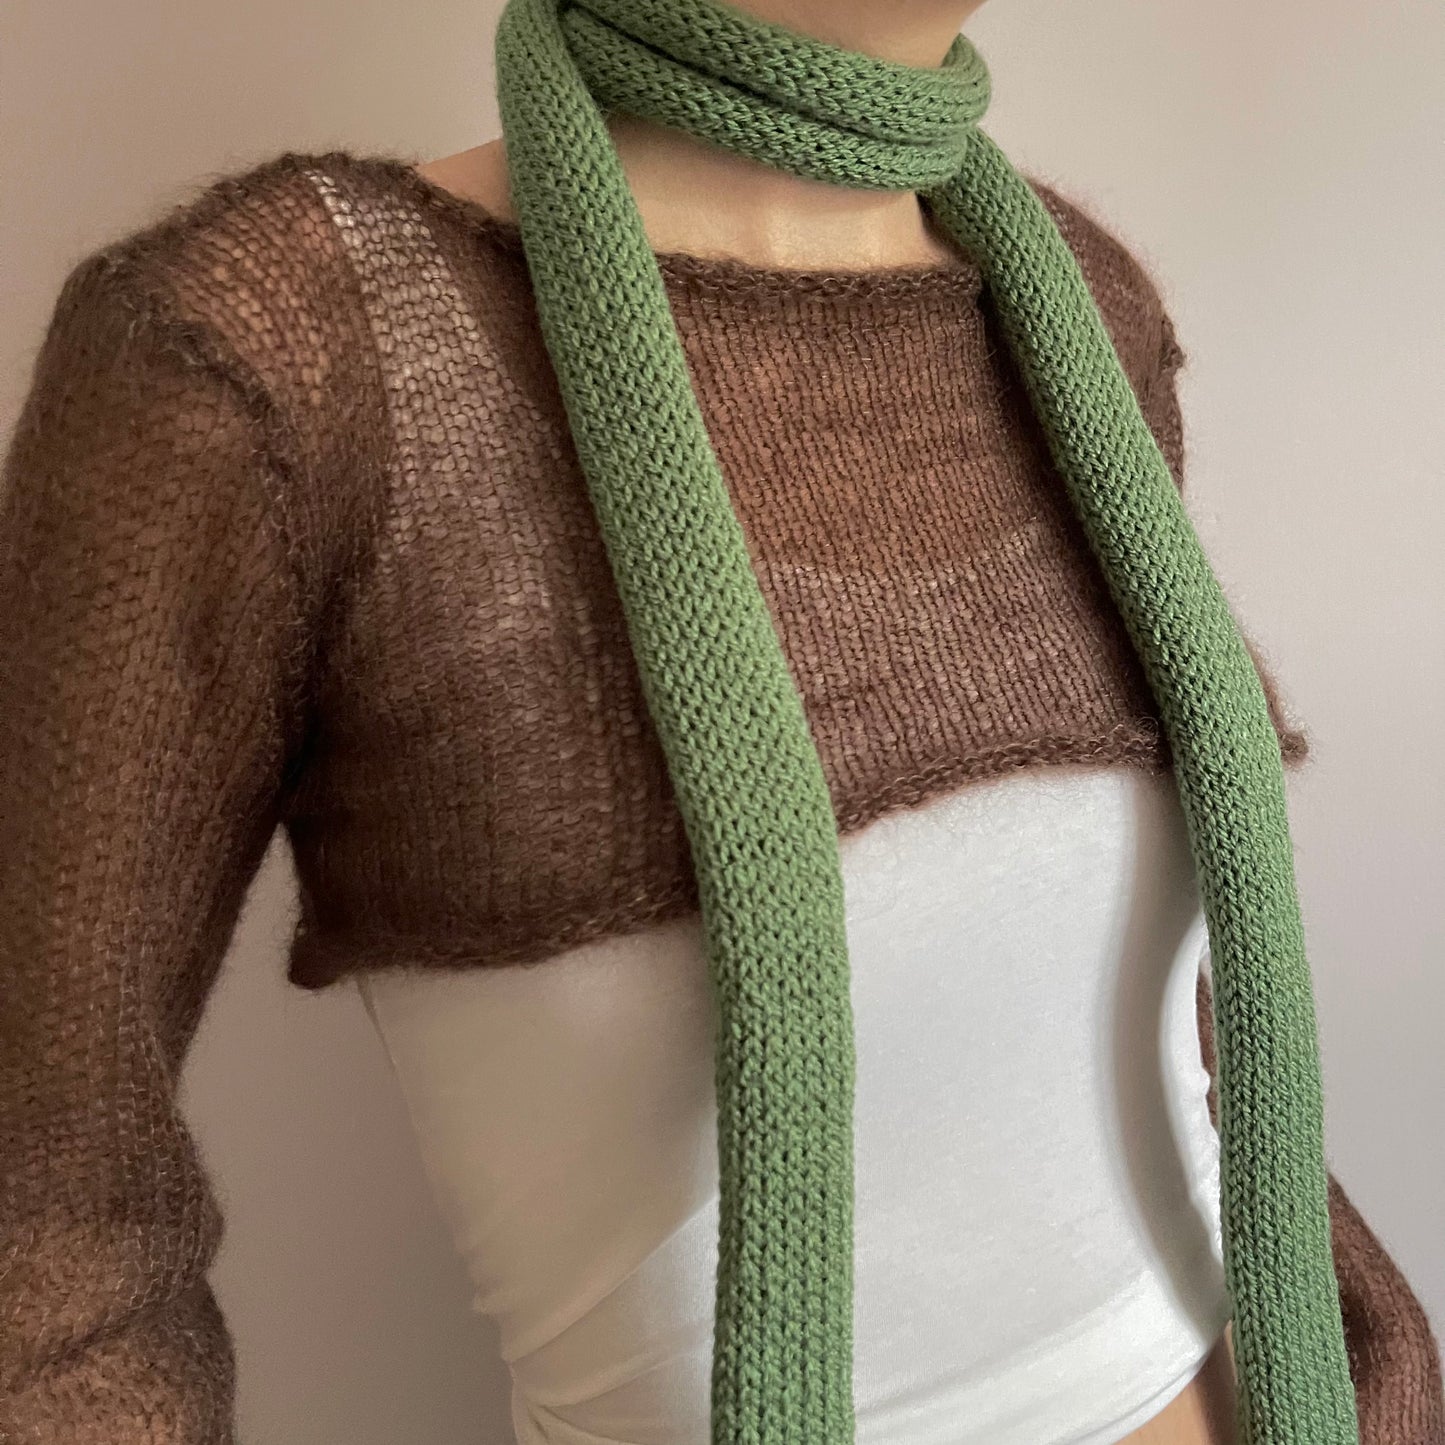 Handmade knitted skinny scarf in sage green